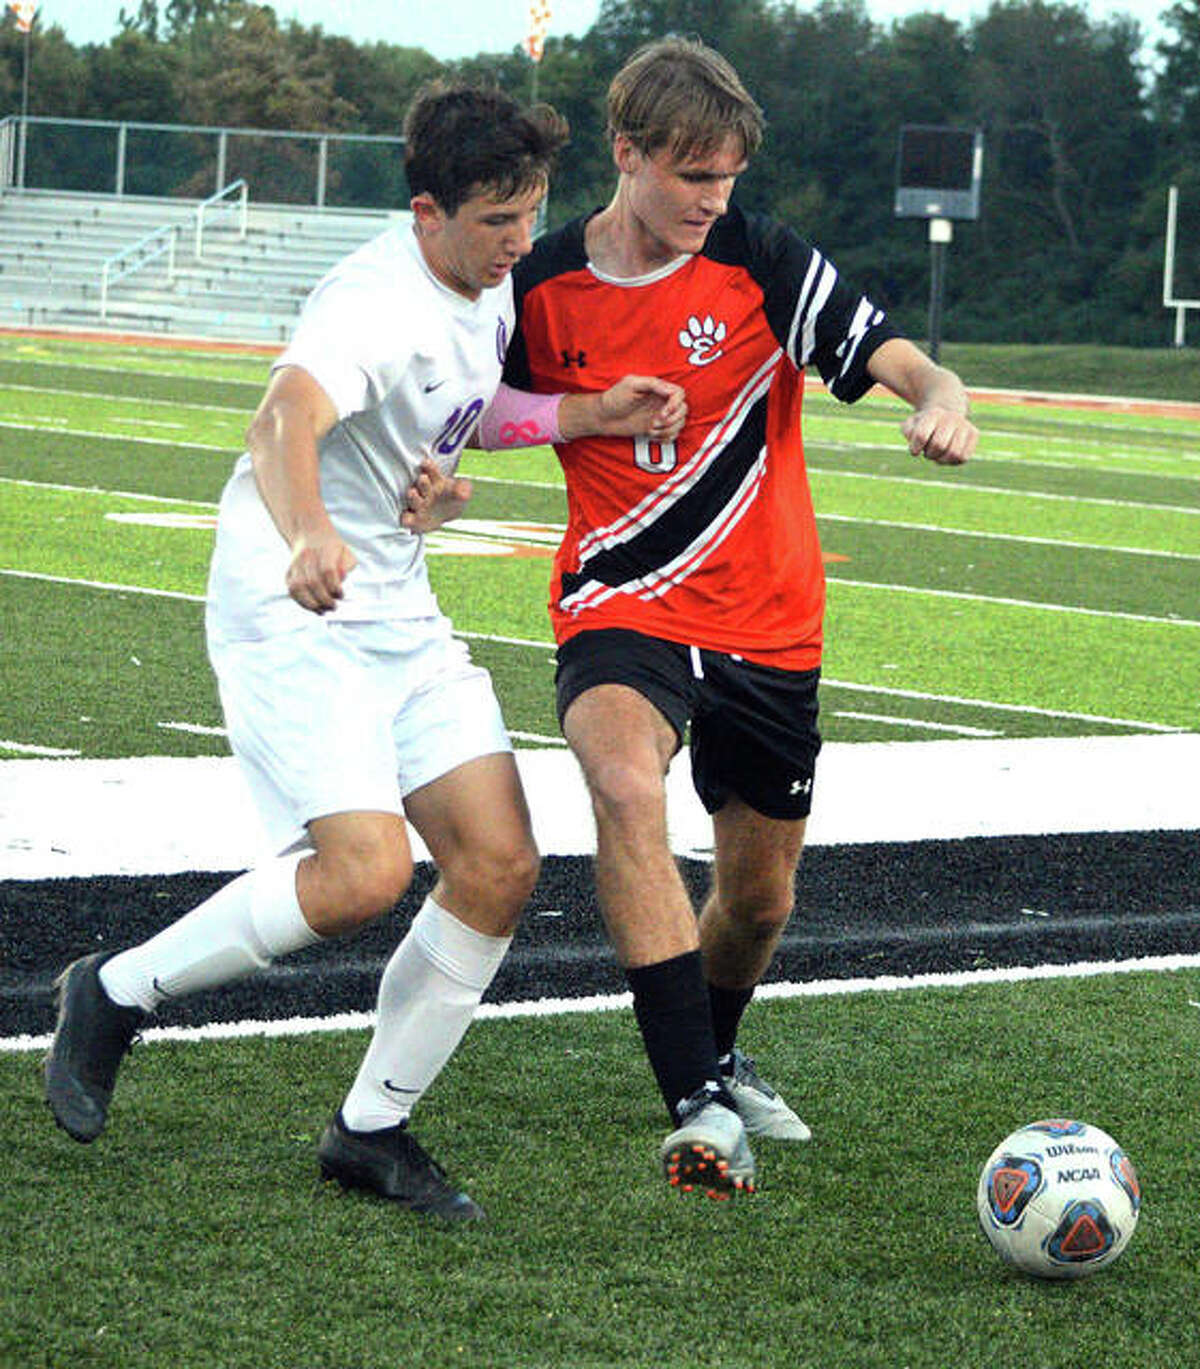 Edwardsville’s Alan Ebert, right, battles for the ball with a Collinsville player during the first half of Thursday’s game at the District 7 Sports Complex.